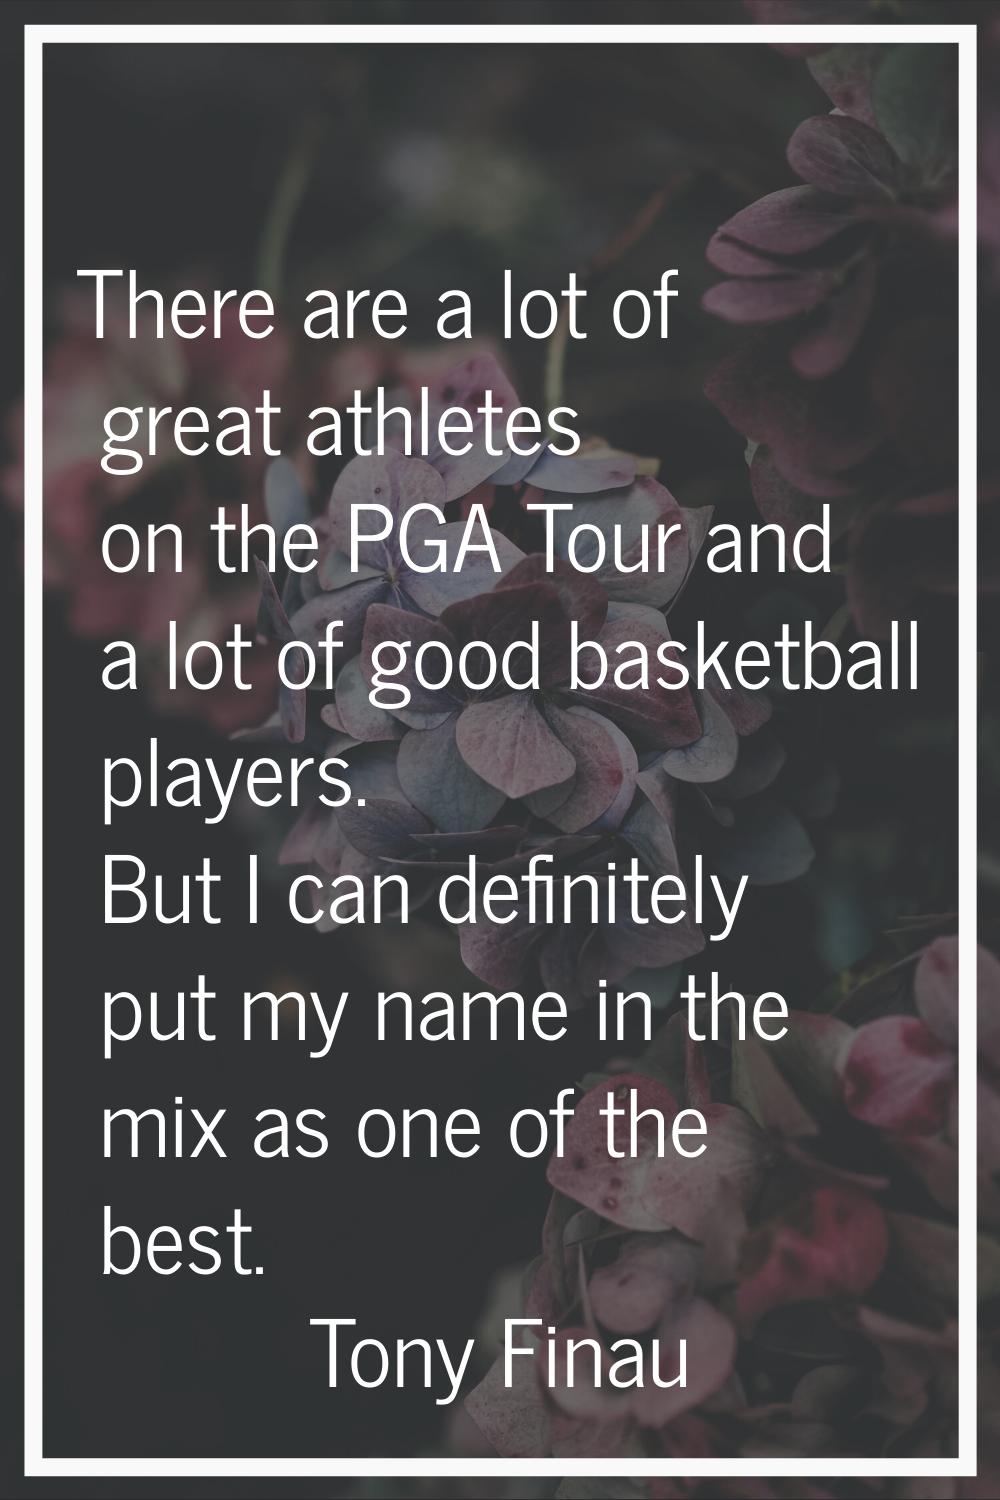 There are a lot of great athletes on the PGA Tour and a lot of good basketball players. But I can d